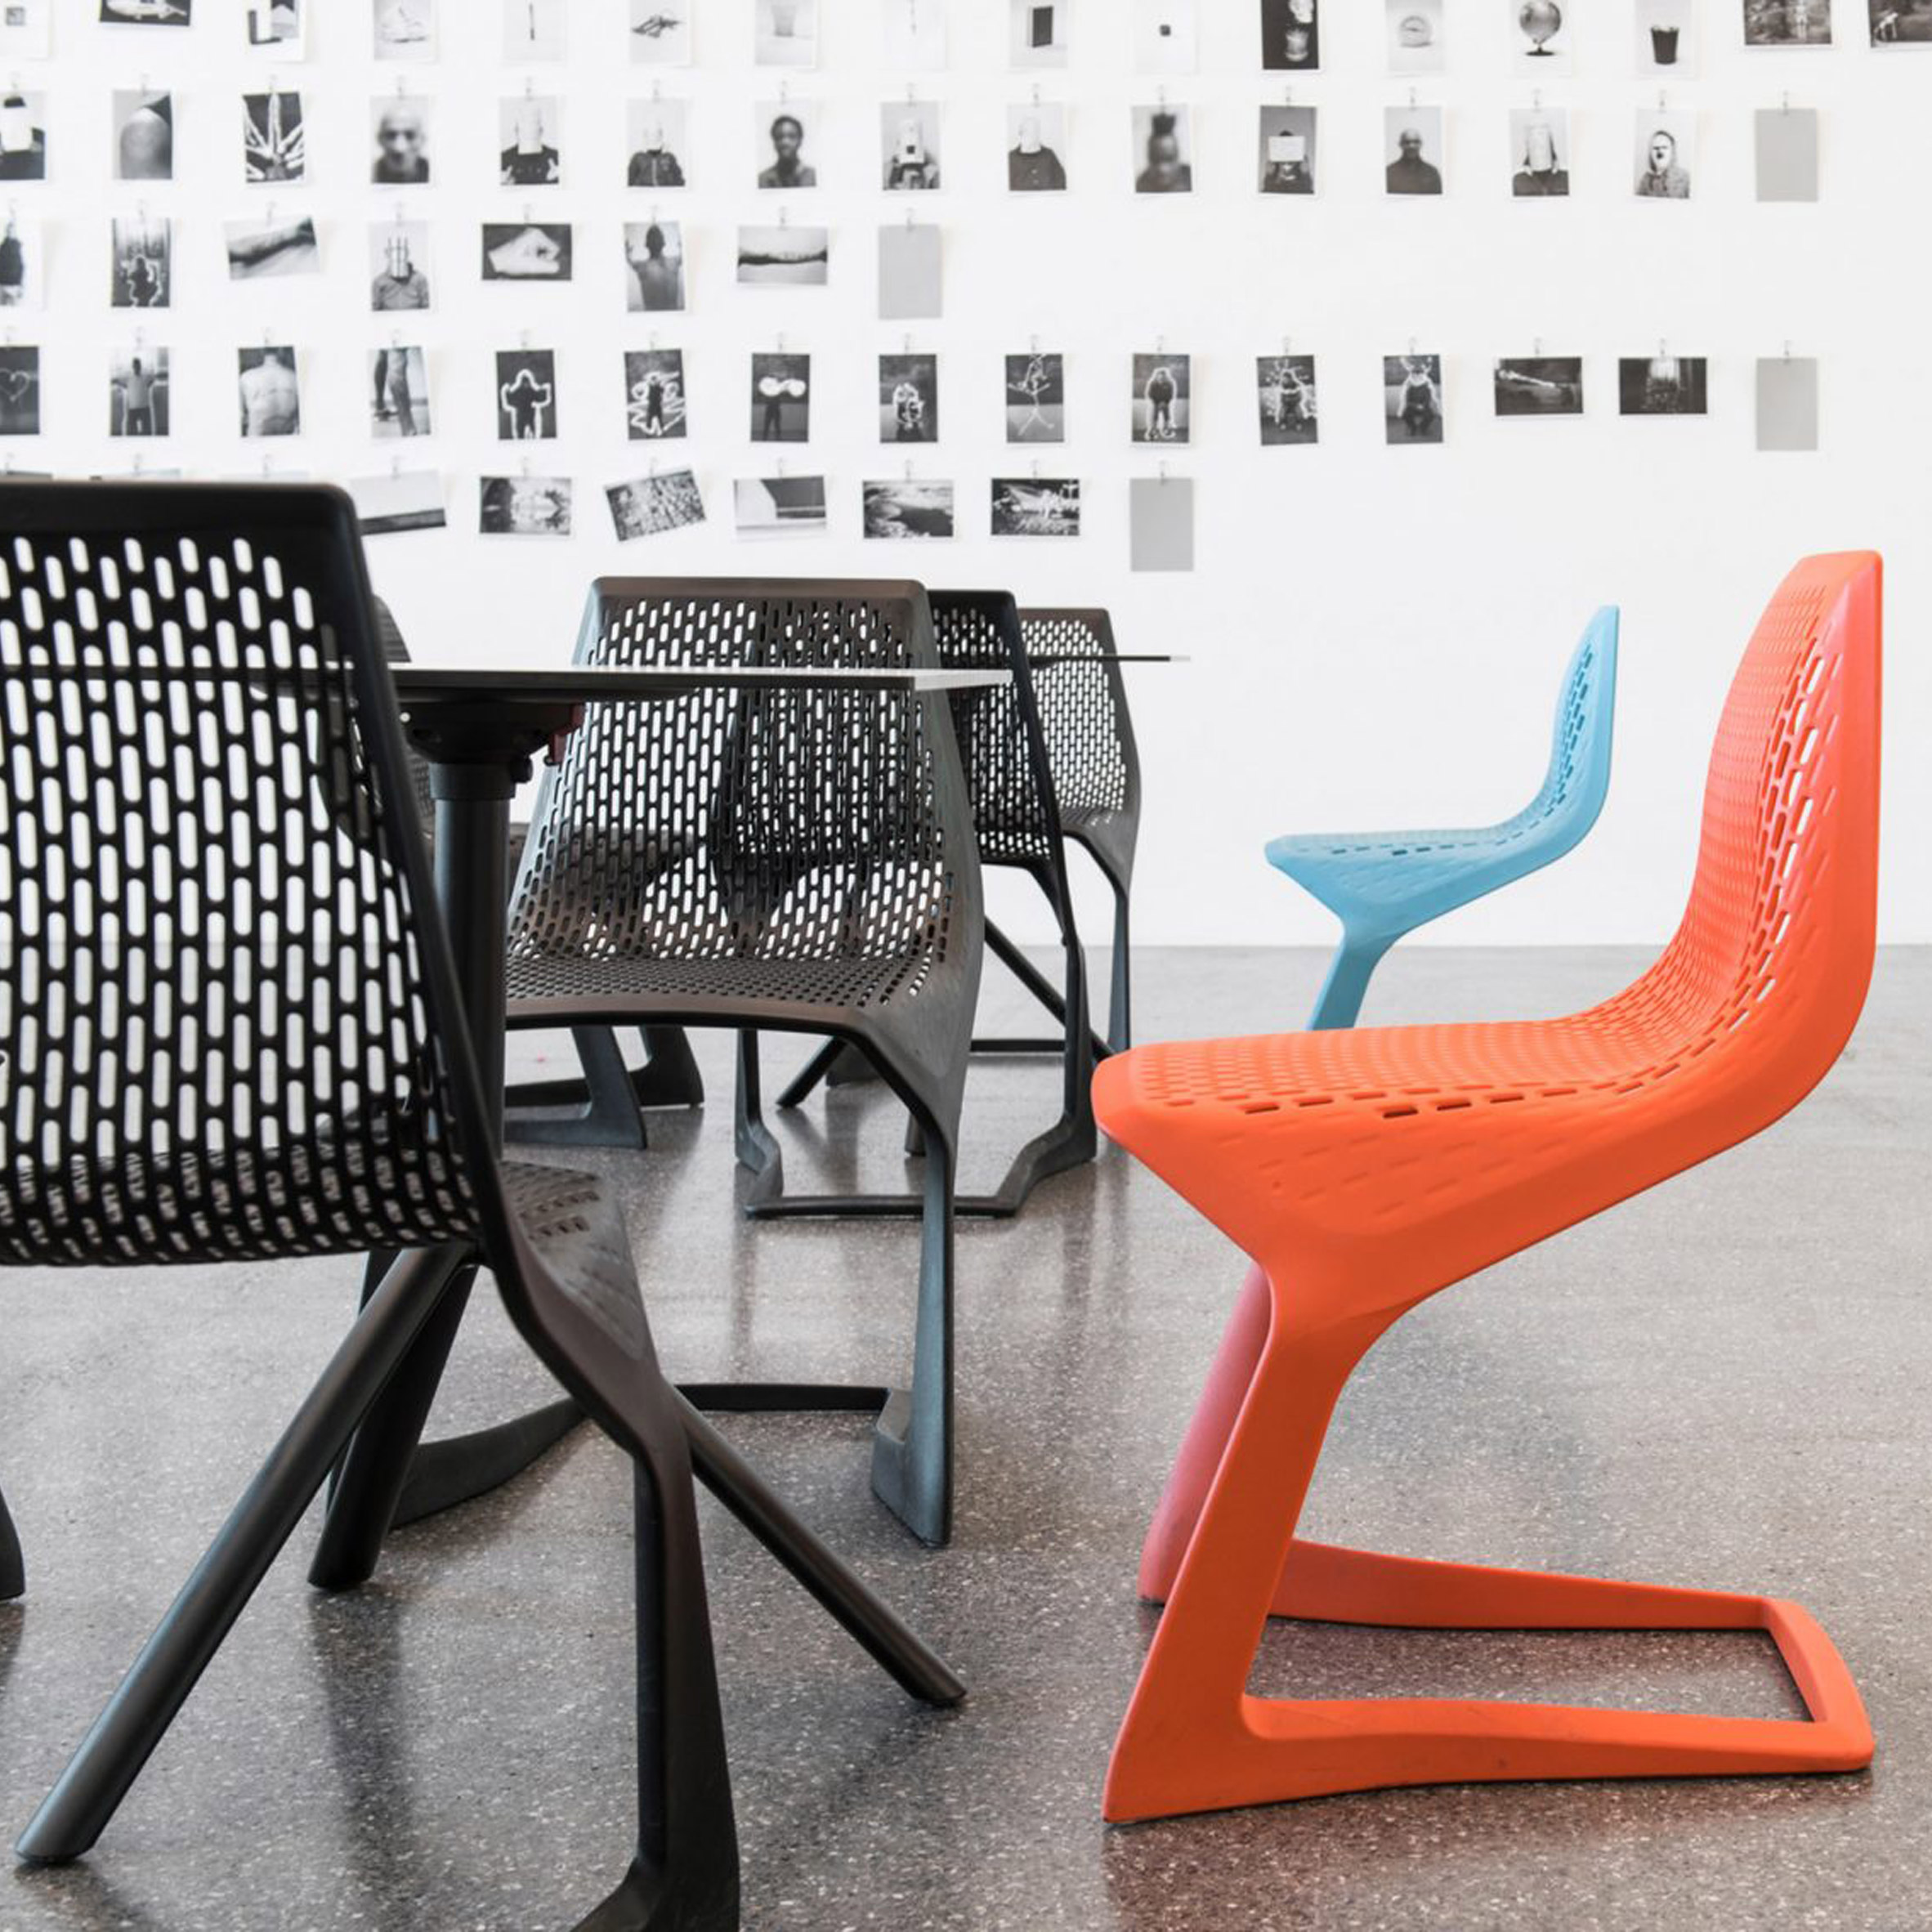 Photo of an orange, blue and black chair